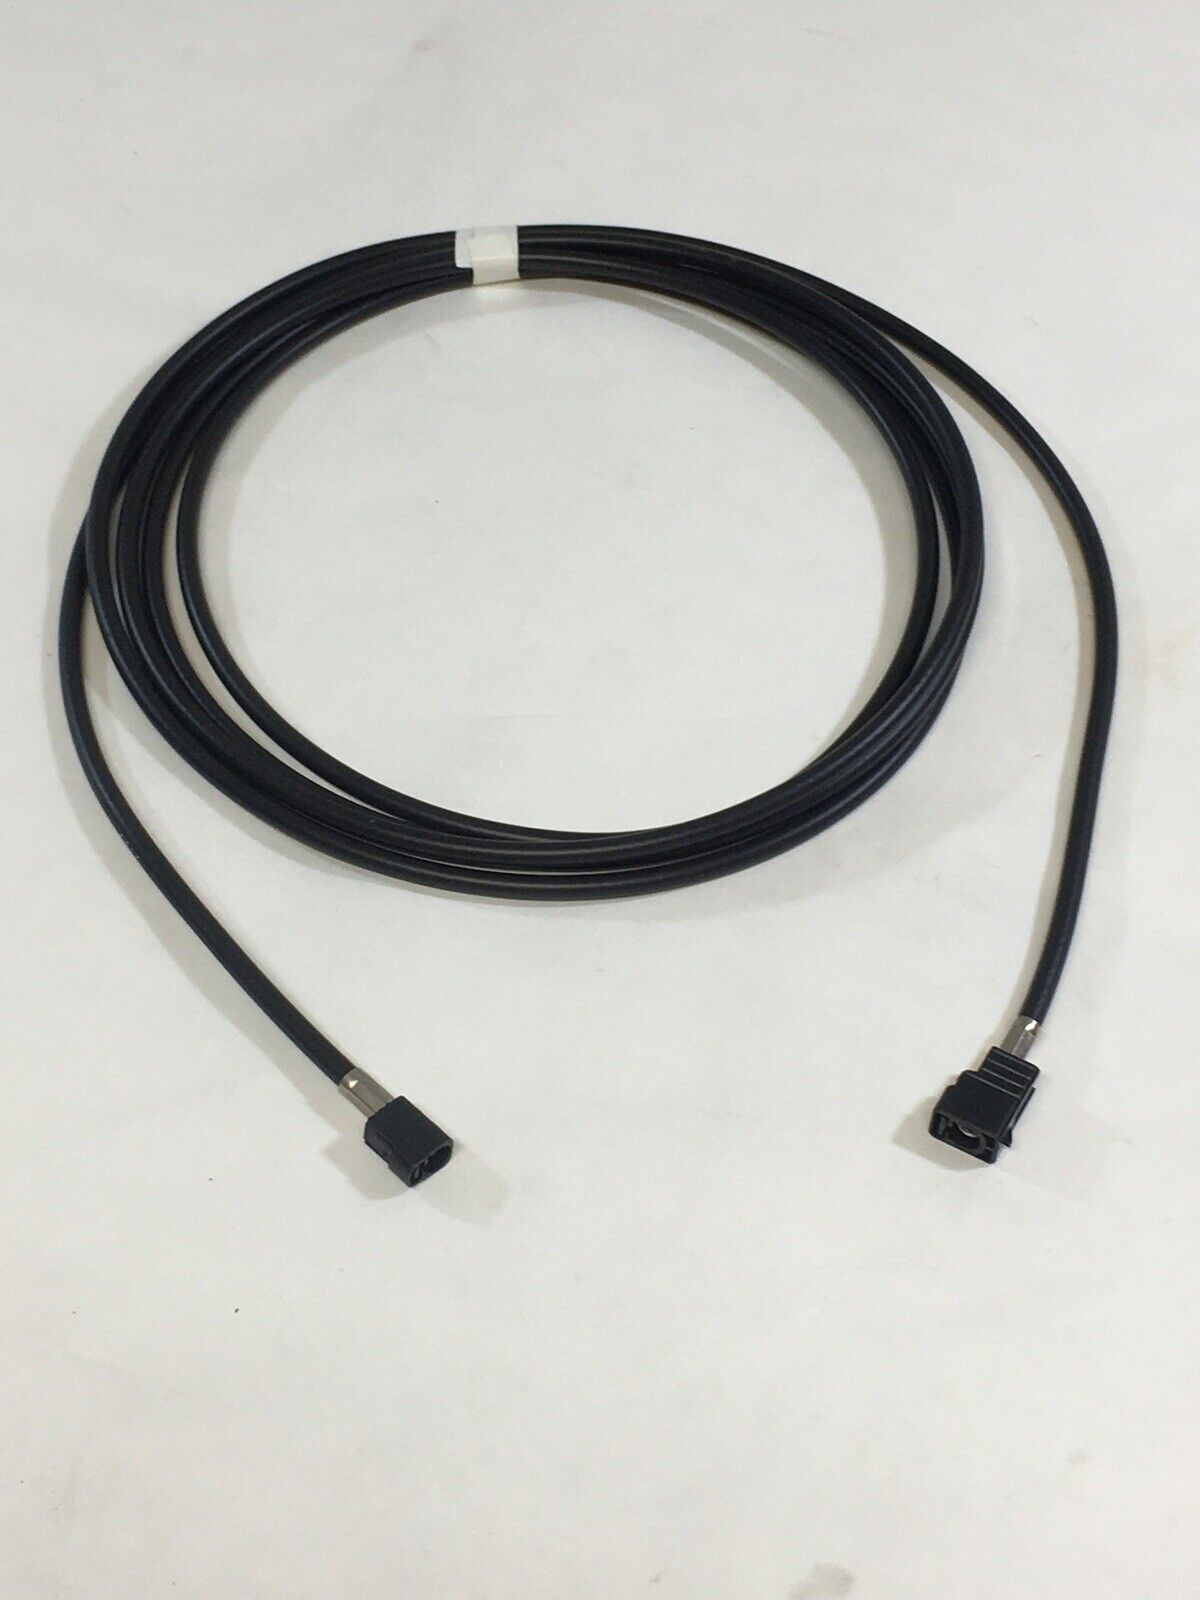 New GM Buick Allure Radio Antenna Cable ACDelco OEM 2010-11 20781769